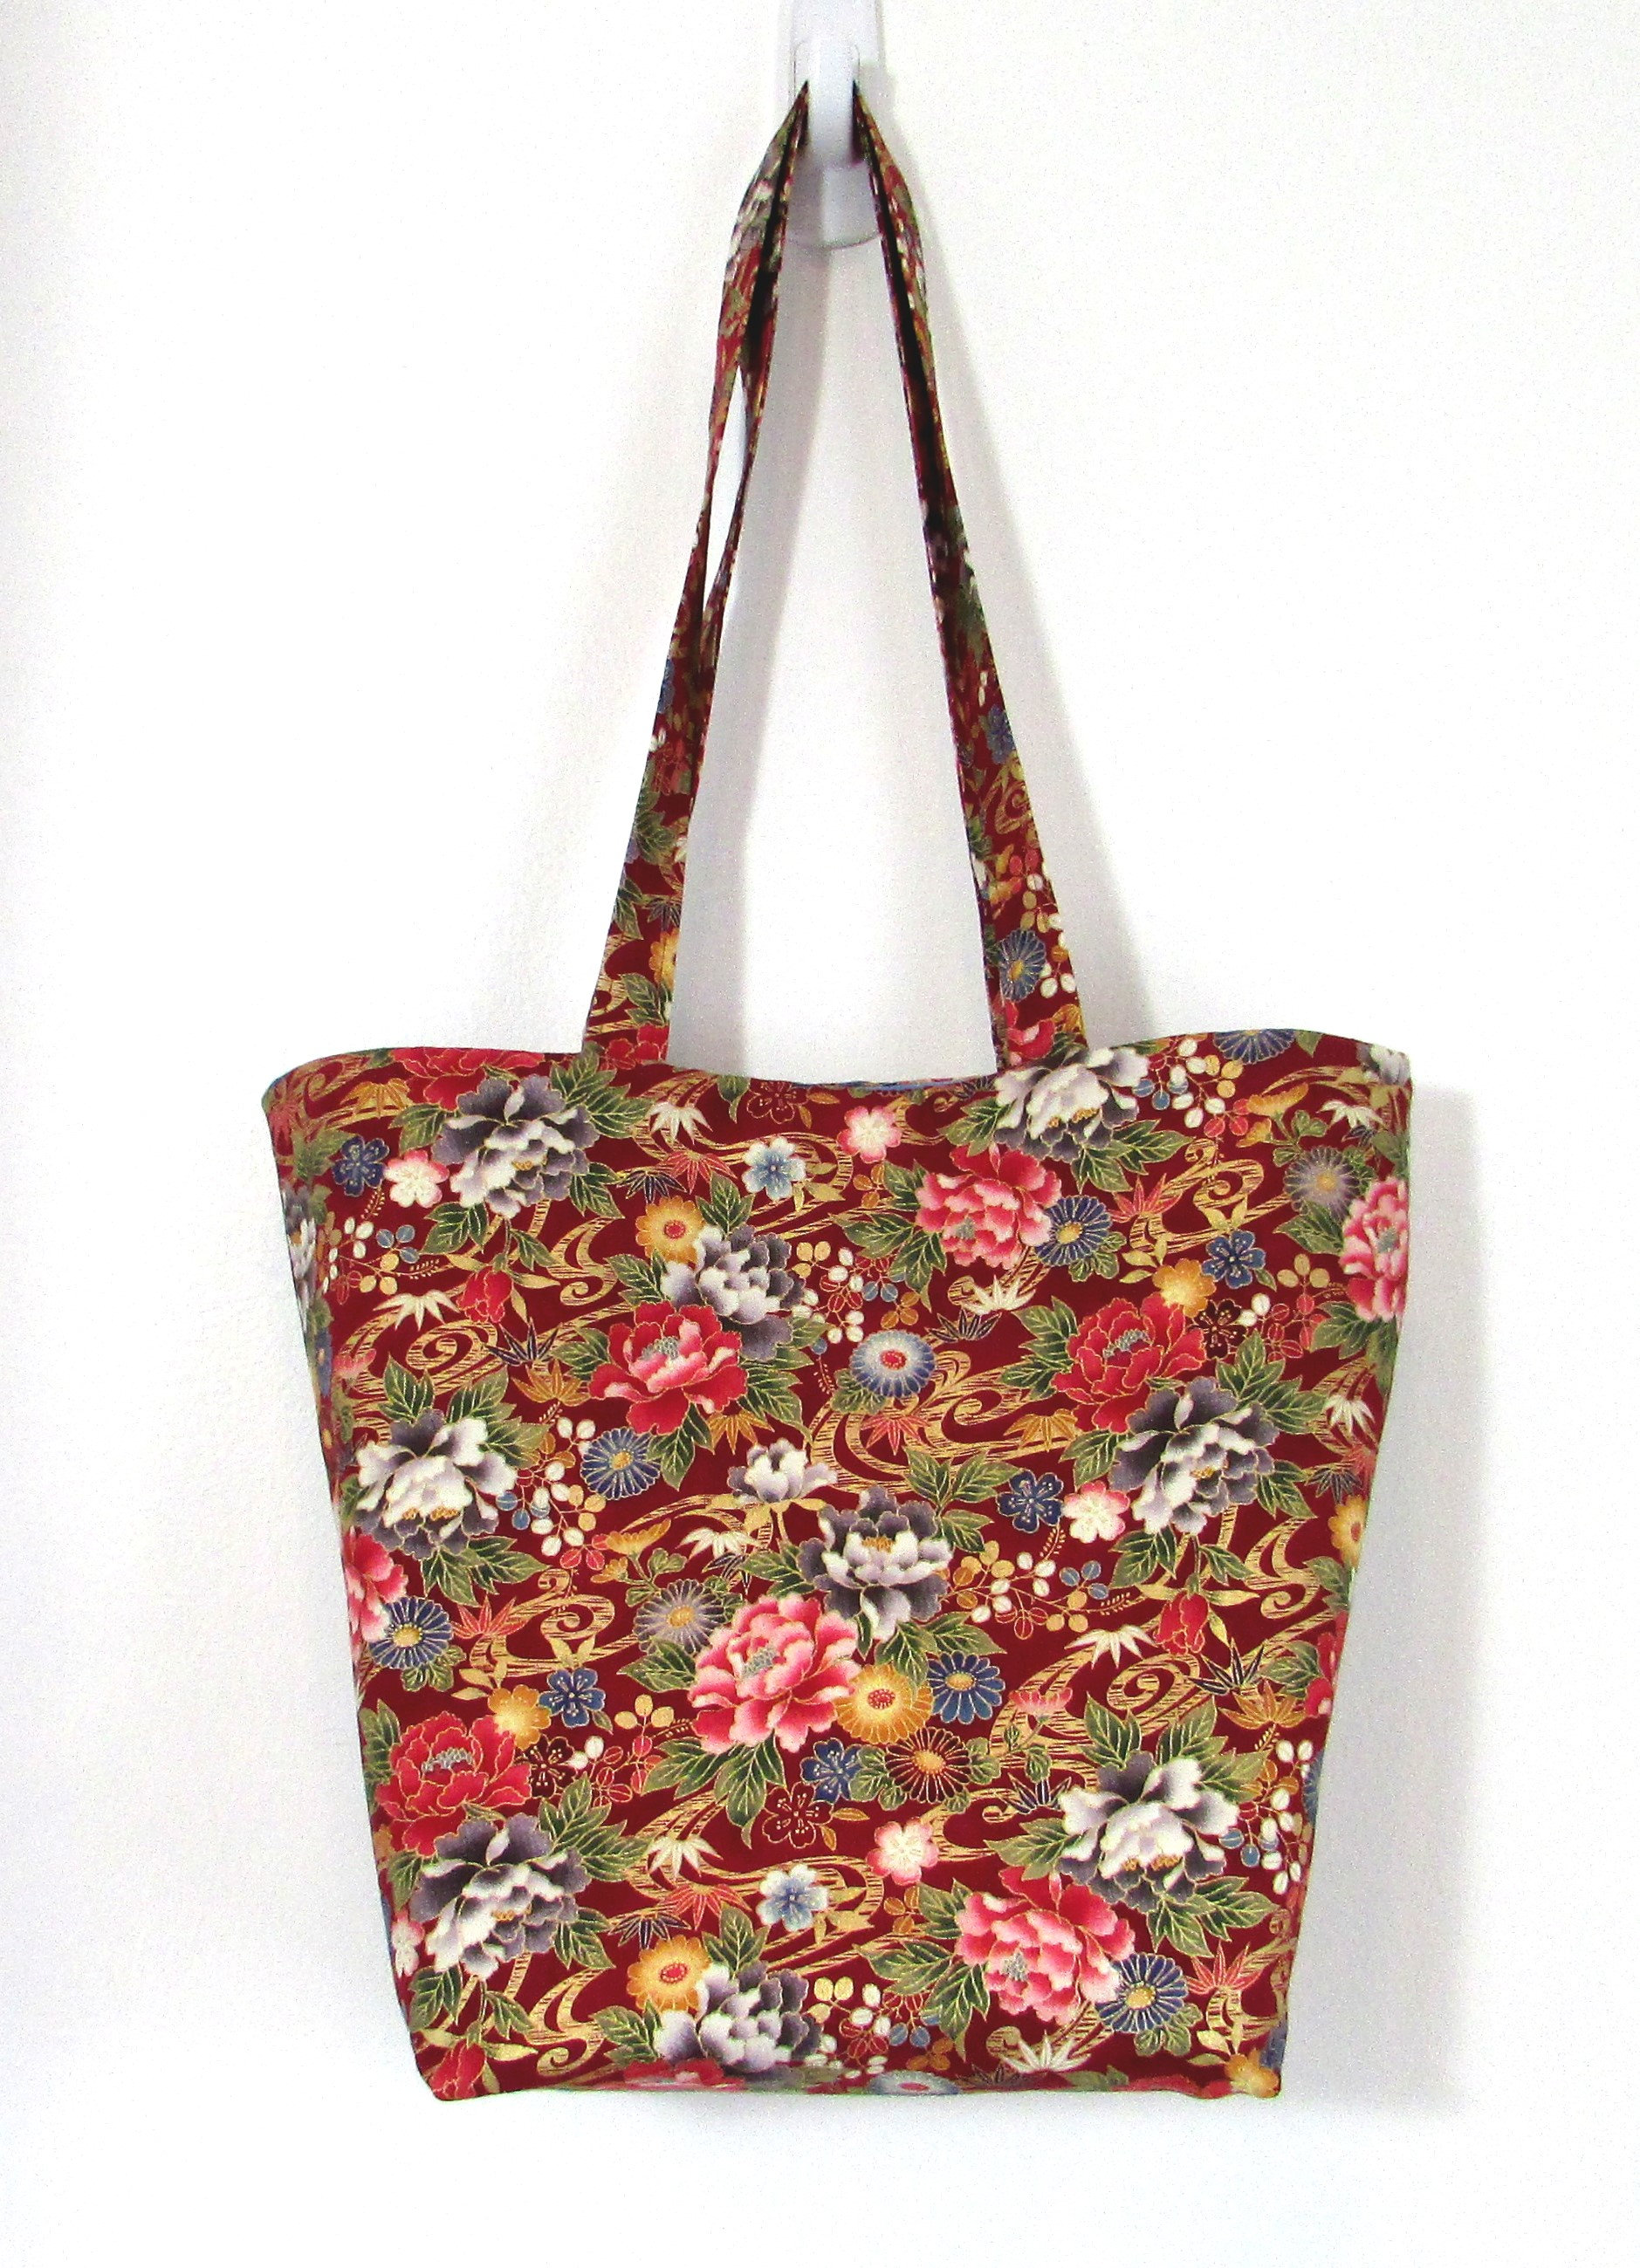 Red Floral Tote Bag, Fabric Purse With Multi Color Flowers, Handmade ...